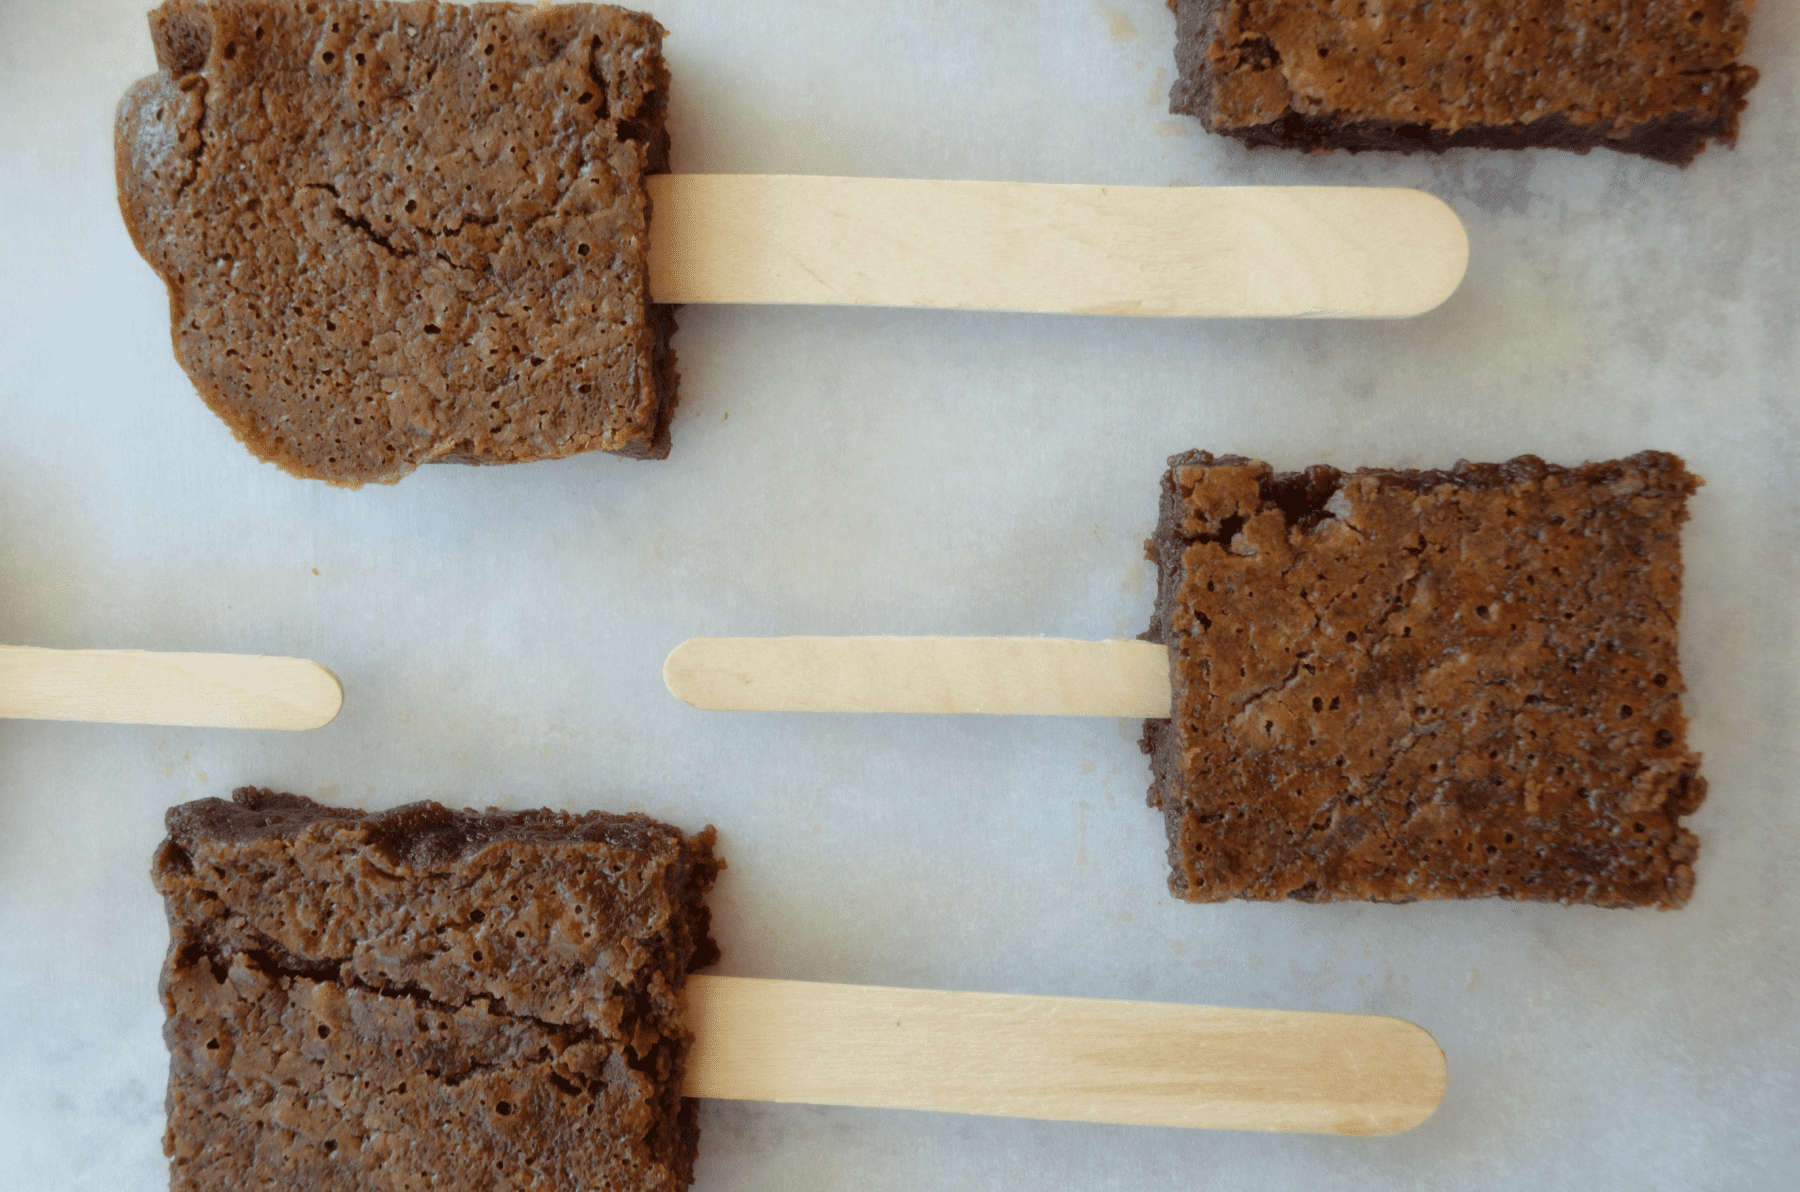 brownies on popsicle sticks lined up on a baking sheet